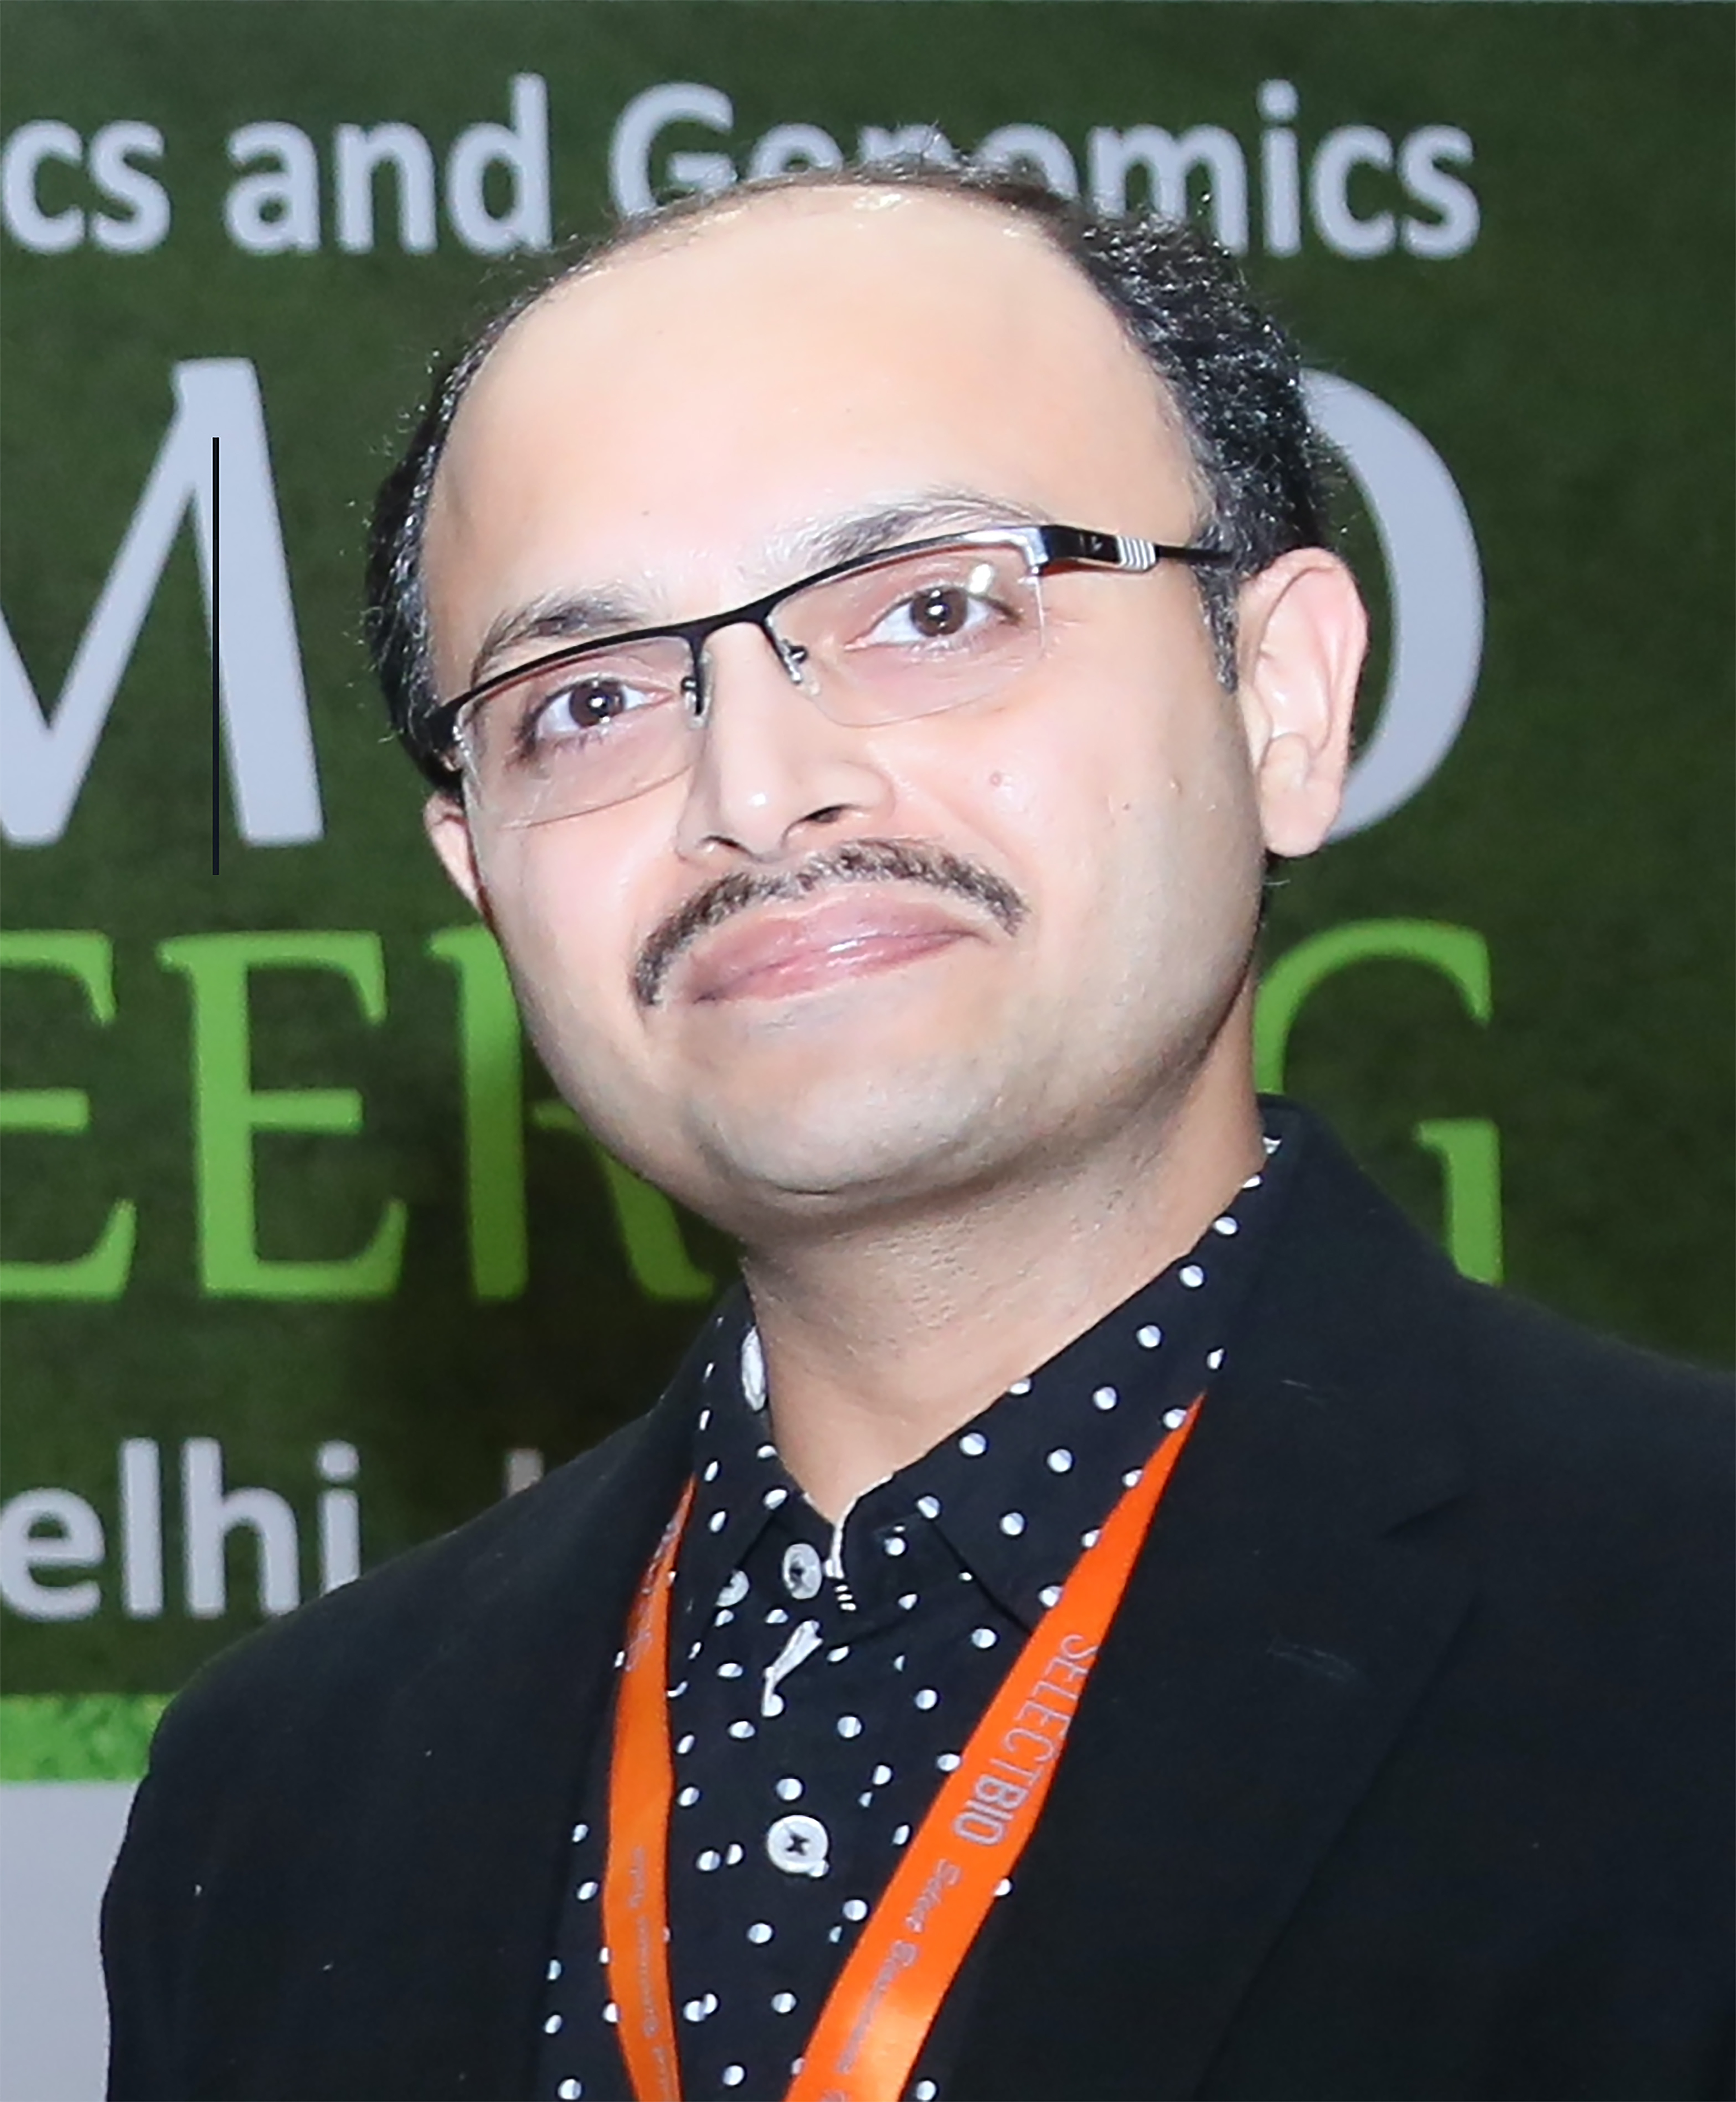 Dr. Rustgi attending a conference. Rustgi is wearing glasses and smiling.